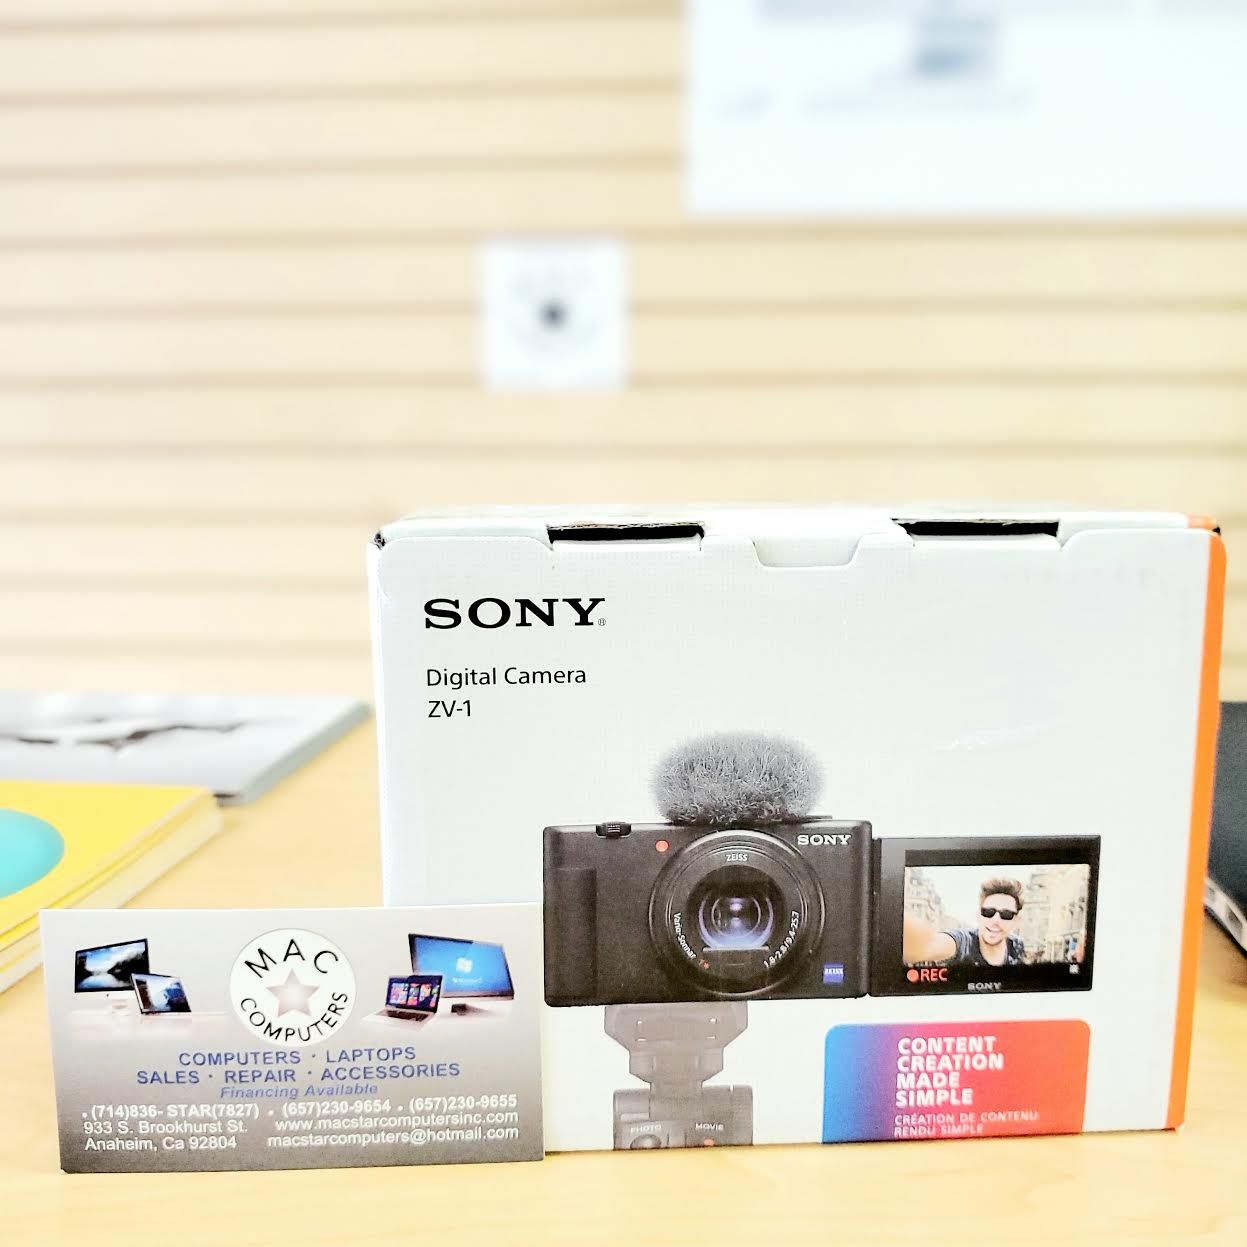 Sony ZV-1 Digital Camera (No credit needed payment option plan! Put $39 down and get your items TODAY!)